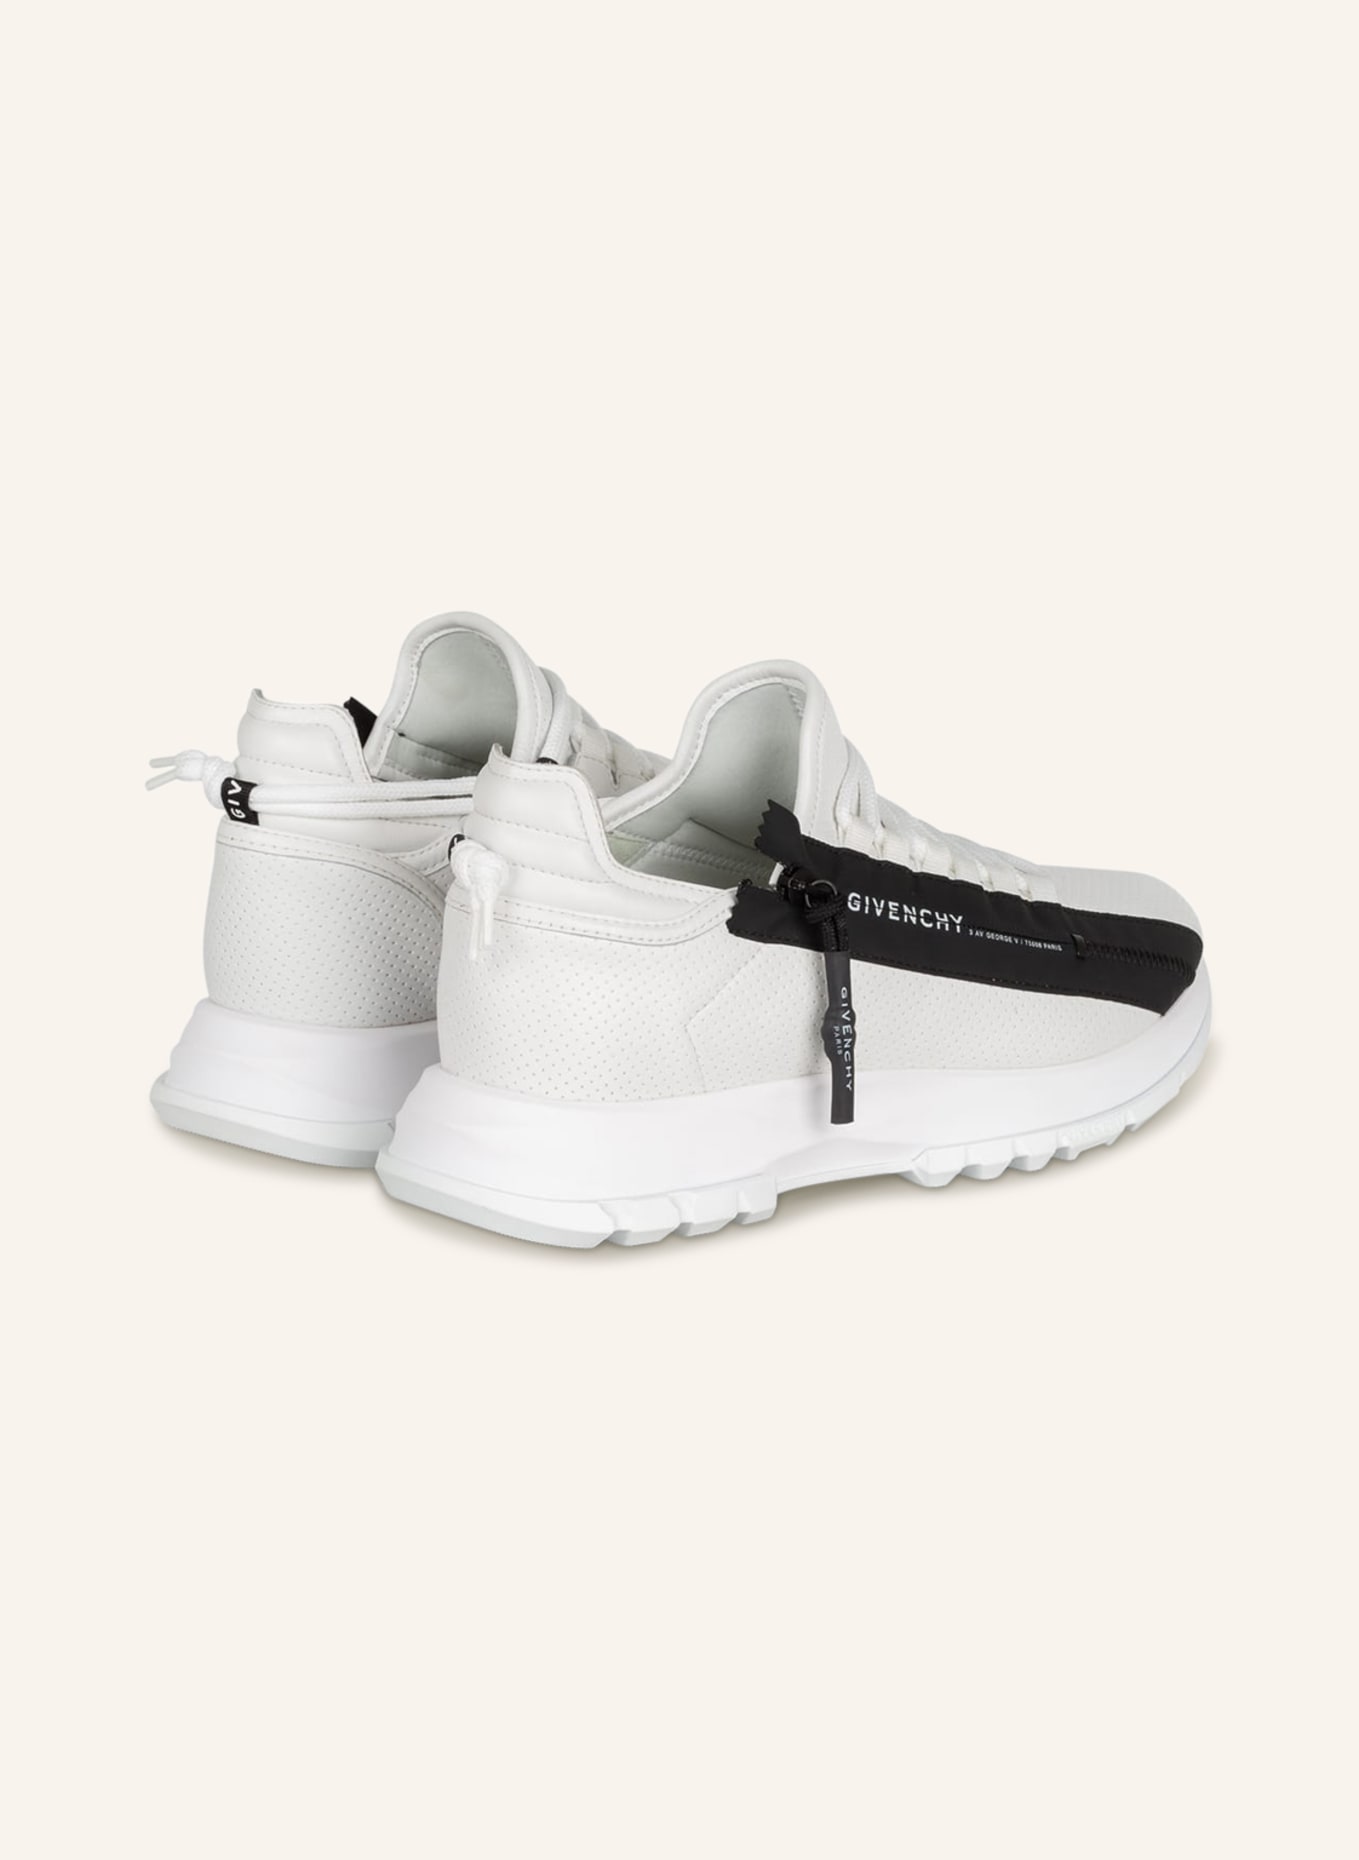 GIVENCHY Sneaker SPECTRE, Farbe: WEISS (Bild 2)